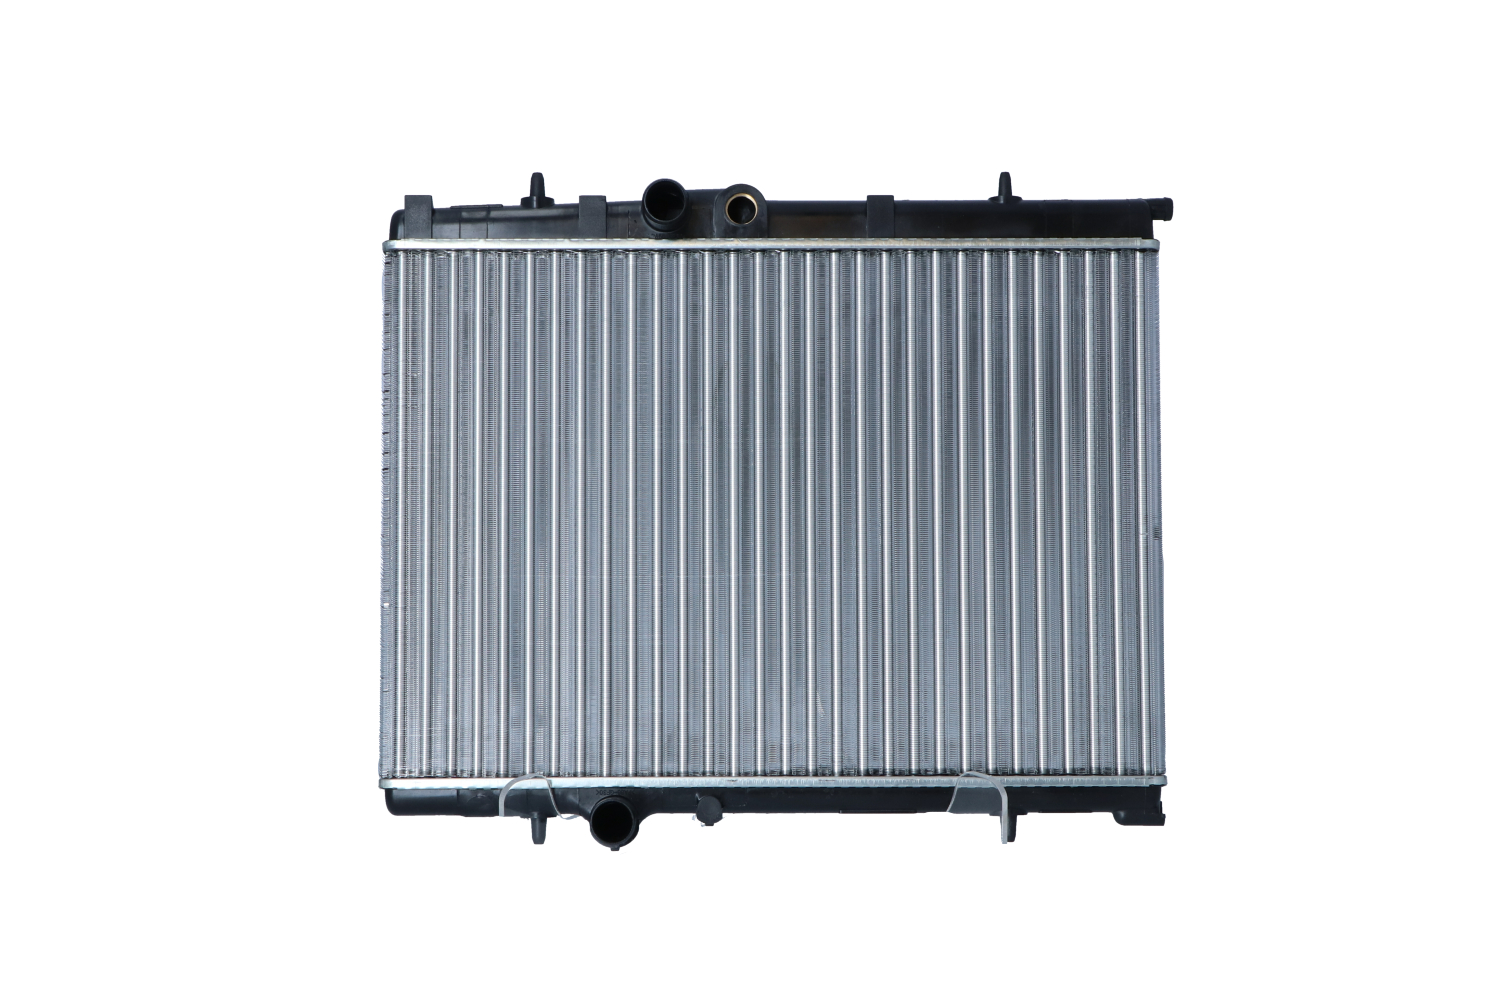 NRF 509524A Engine radiator Aluminium, 563 x 380 x 23 mm, Economy Class, Mechanically jointed cooling fins